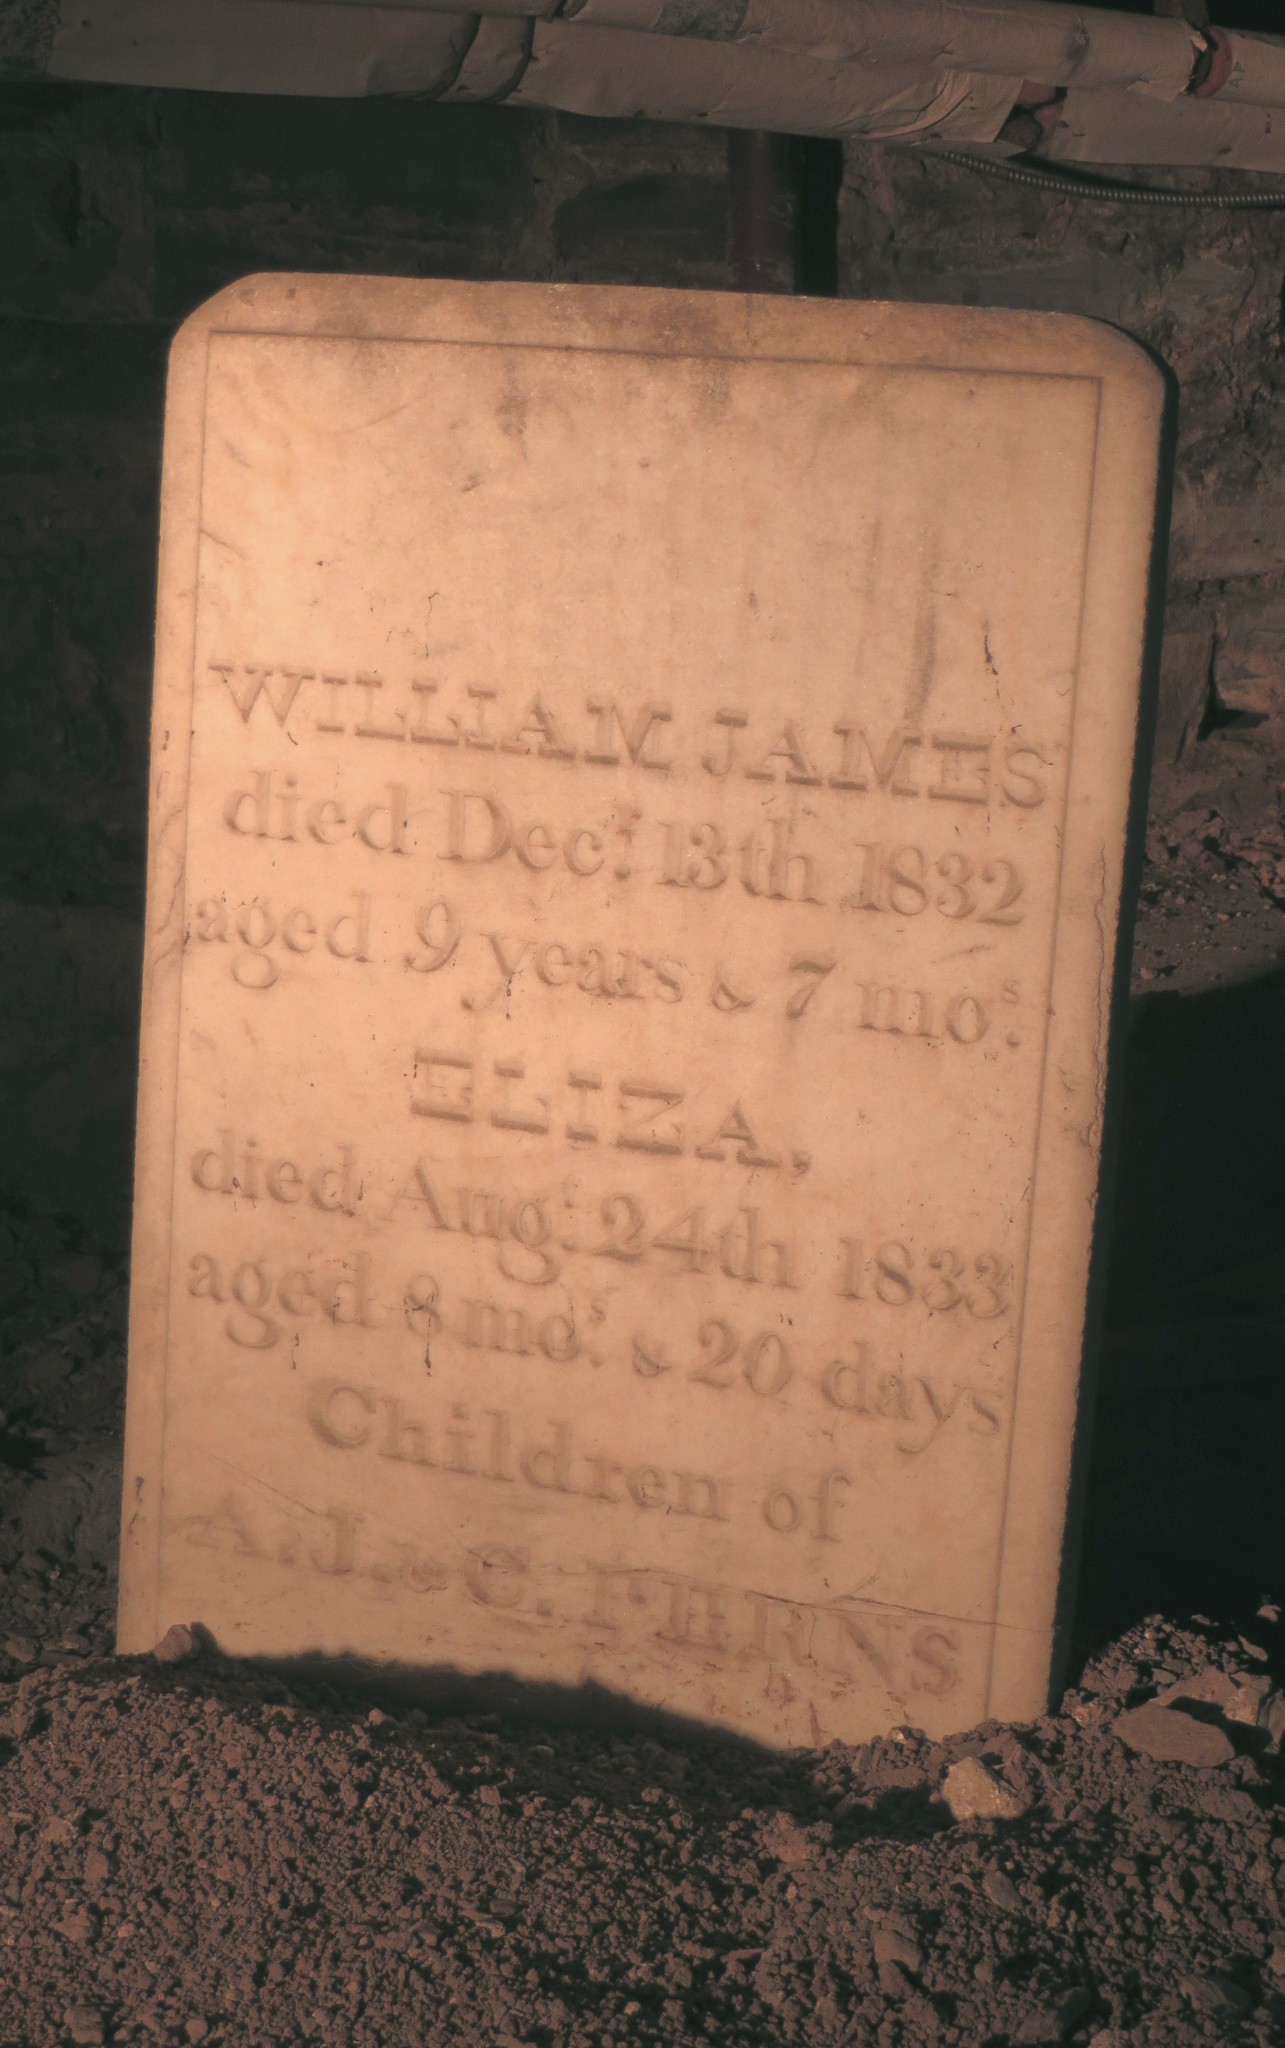 Marker for William James and Eliza Ferns, under the church hall (Credit Mary Davis Little)